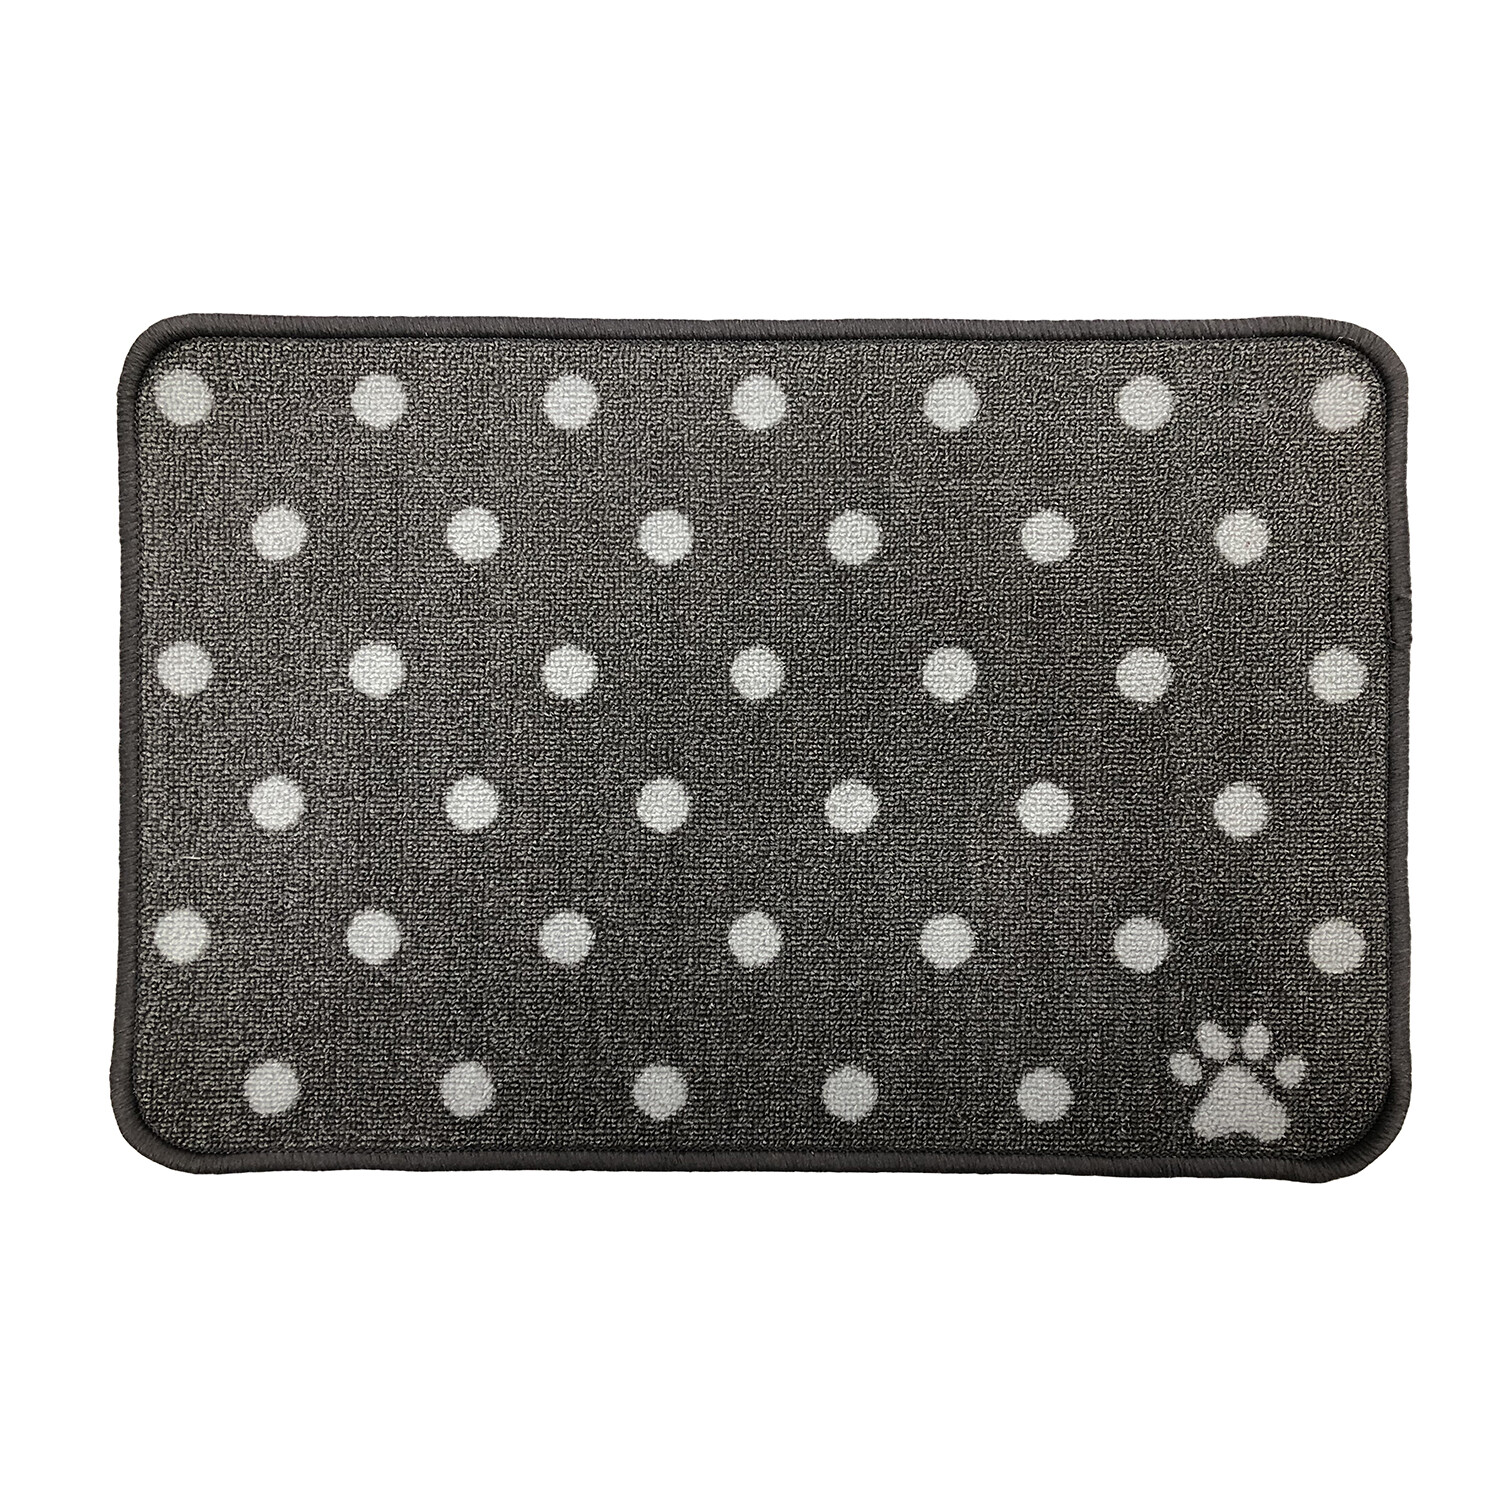 Mighty Paws 40 x 30cm Grey Dotted Pet Feeding Mat Image 1